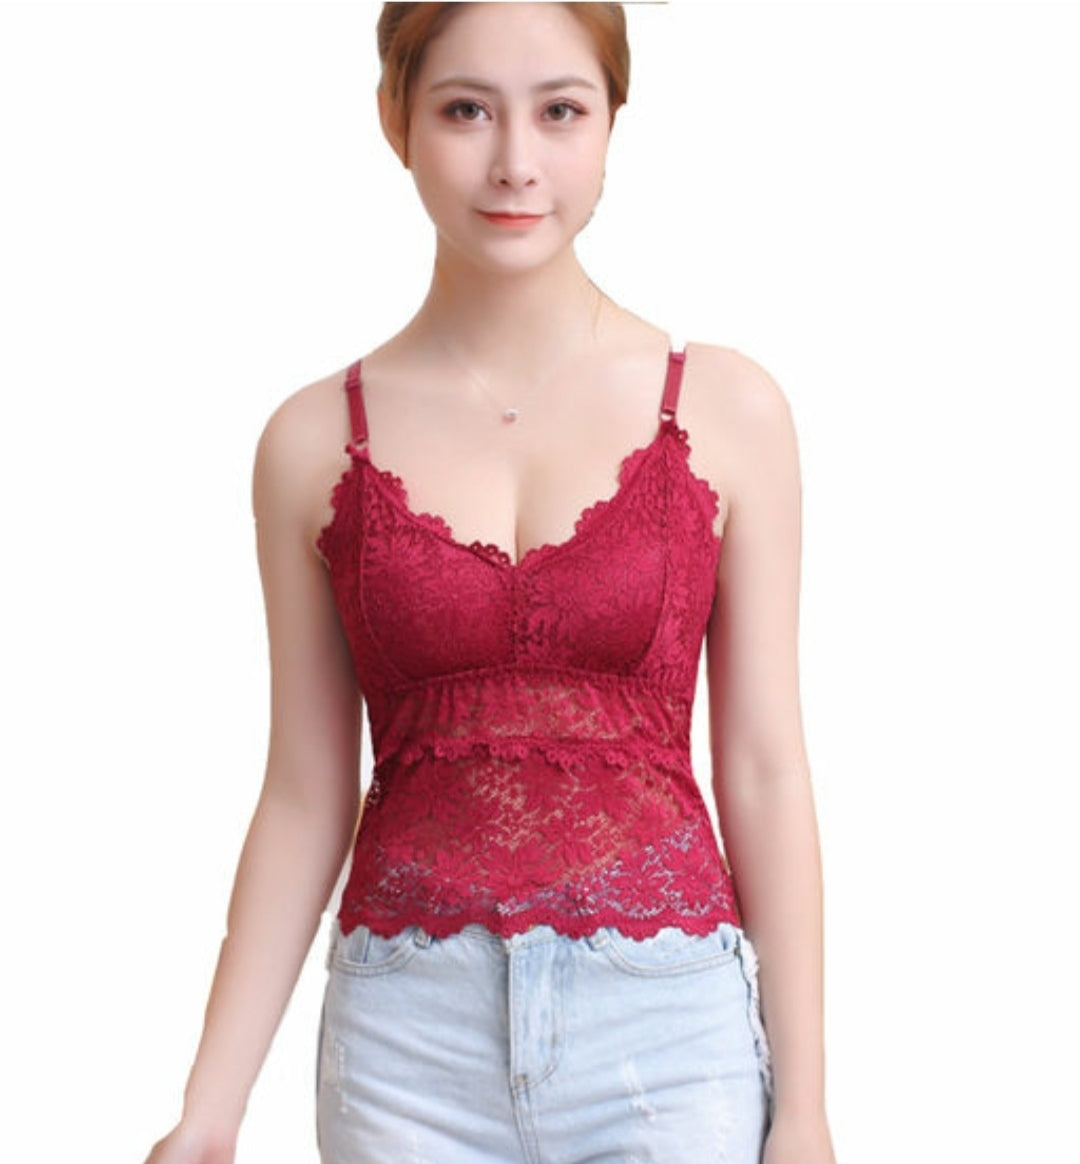 Sassy Embroidered Iconic Bralette Top for Women.